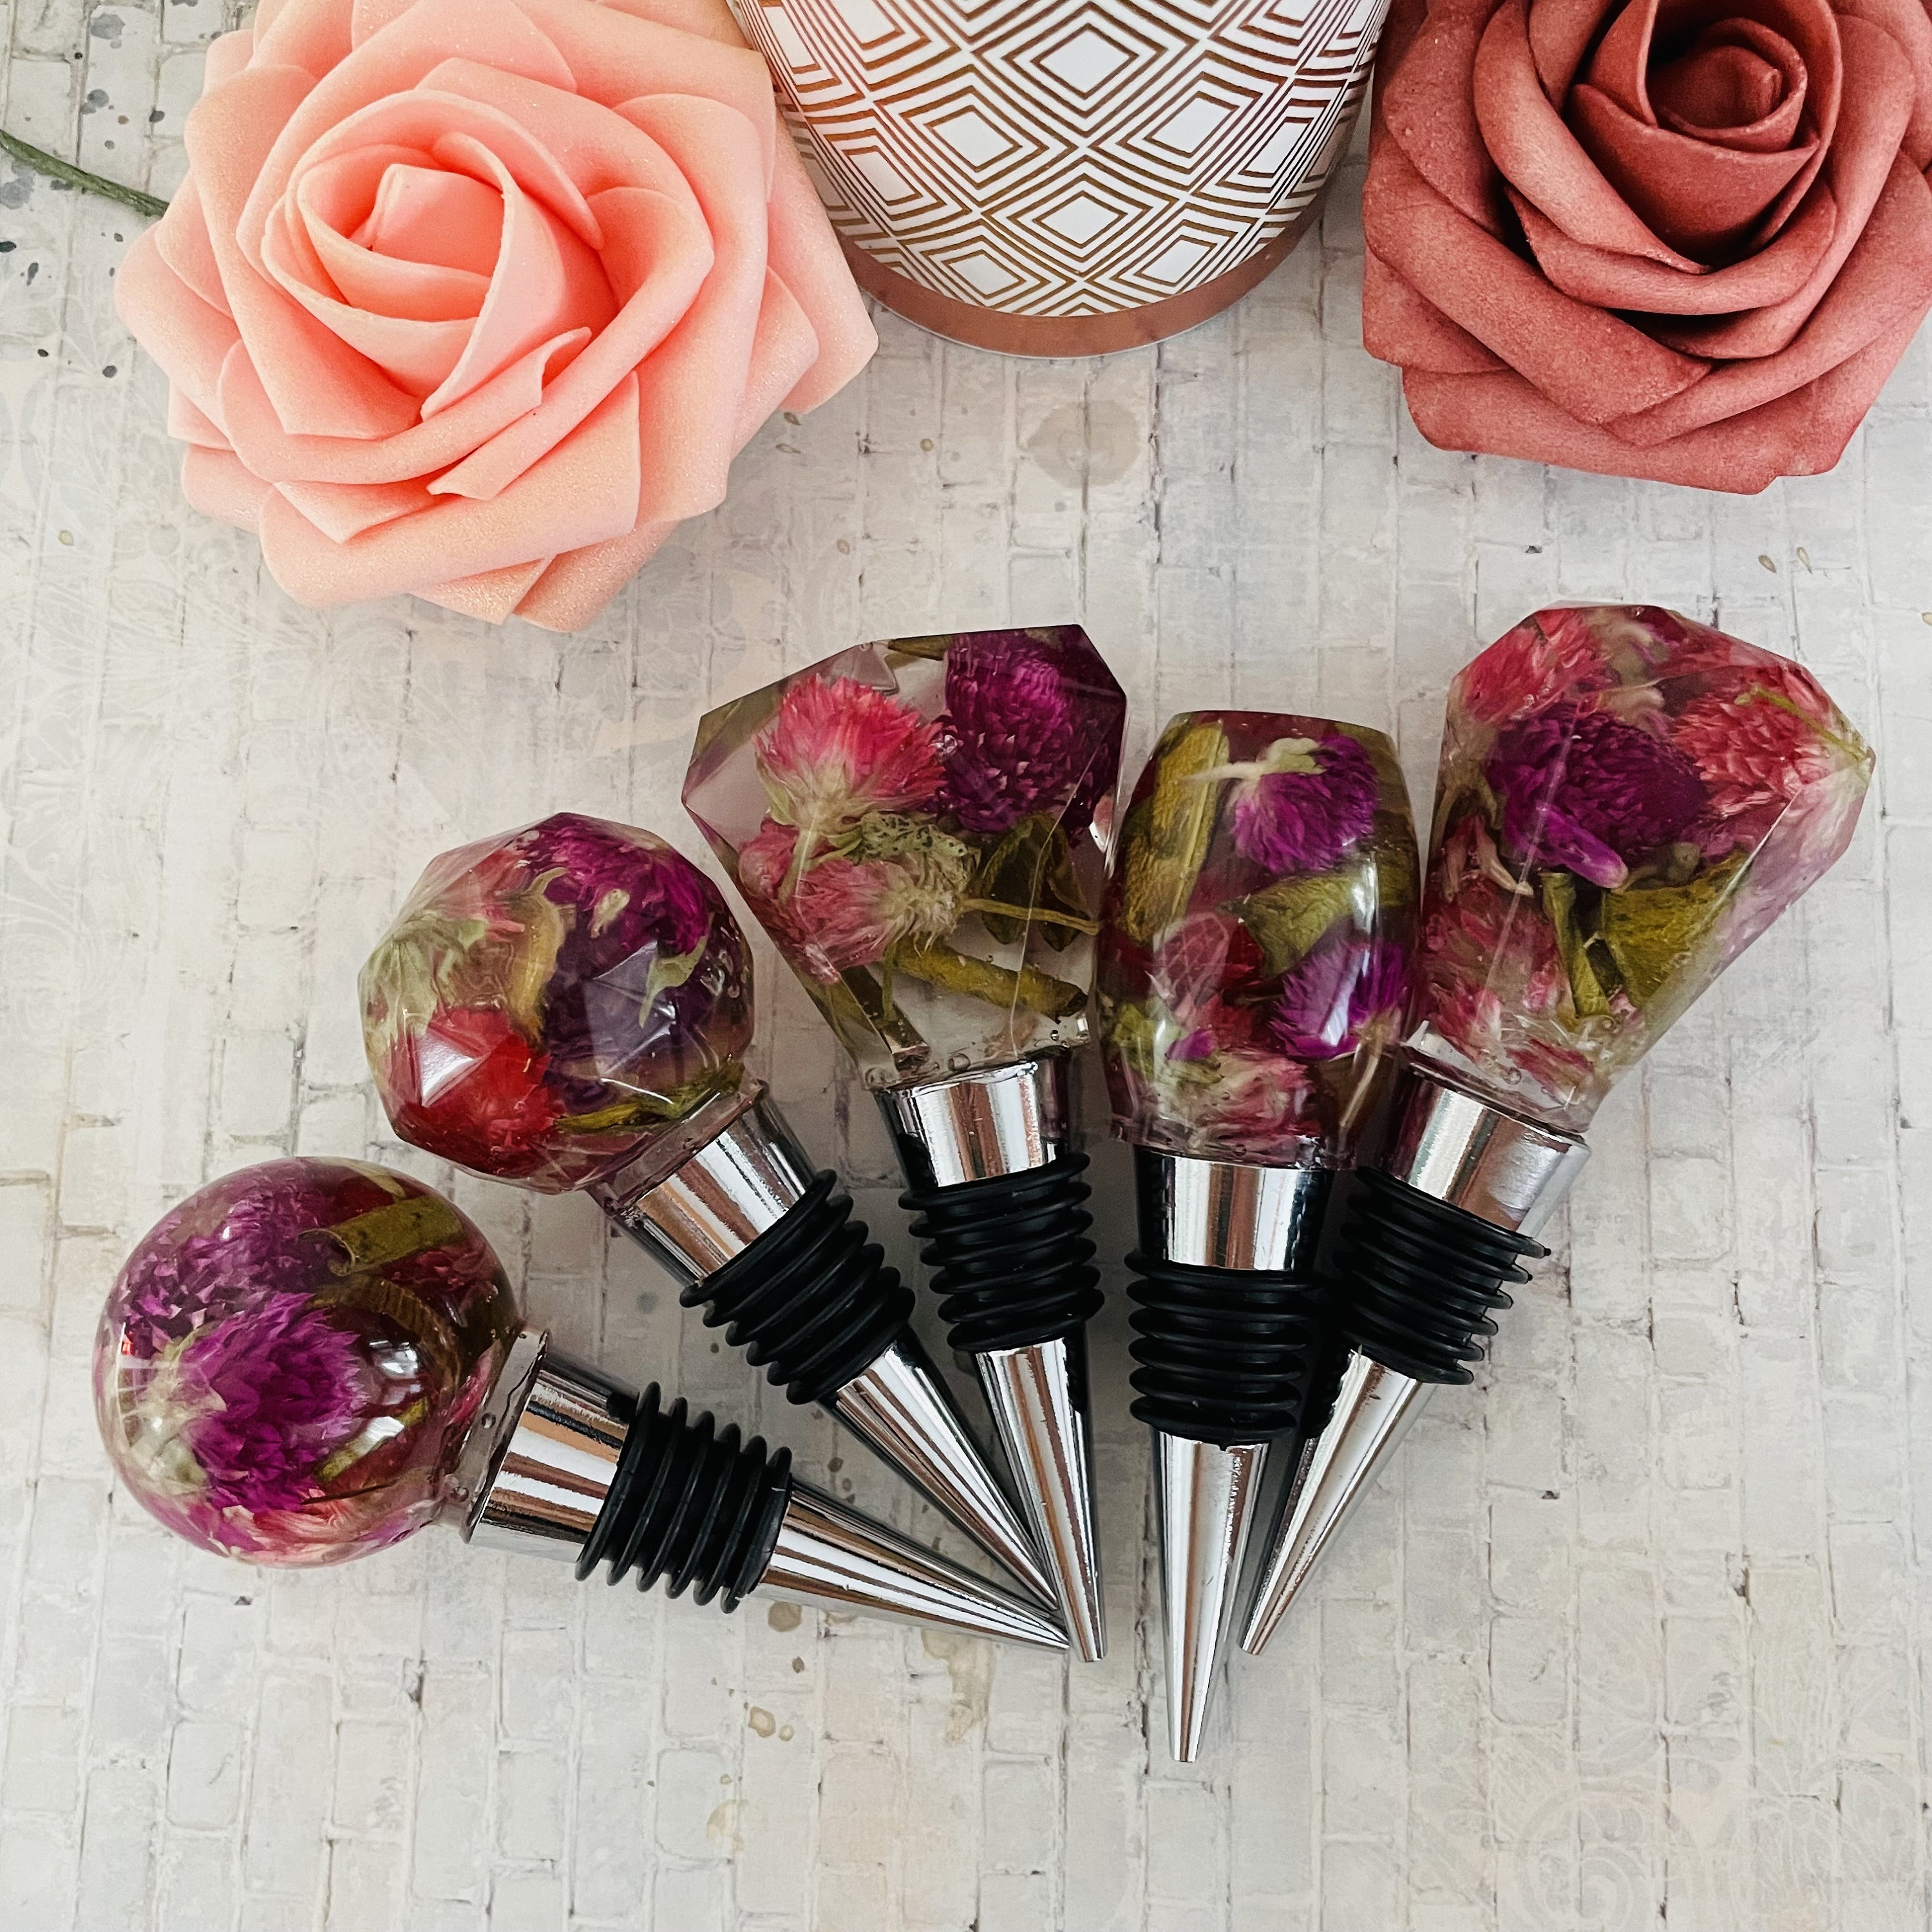 Resin Molds for Wine Stopper , 5PCS Wine Bottle Stopper Silicone Molds for  Resin, with 5 Resin Plugs, with a Box of Dried Flowers and 12PCS Star Moon  Accessories,Crystal Gem Shaped Resin